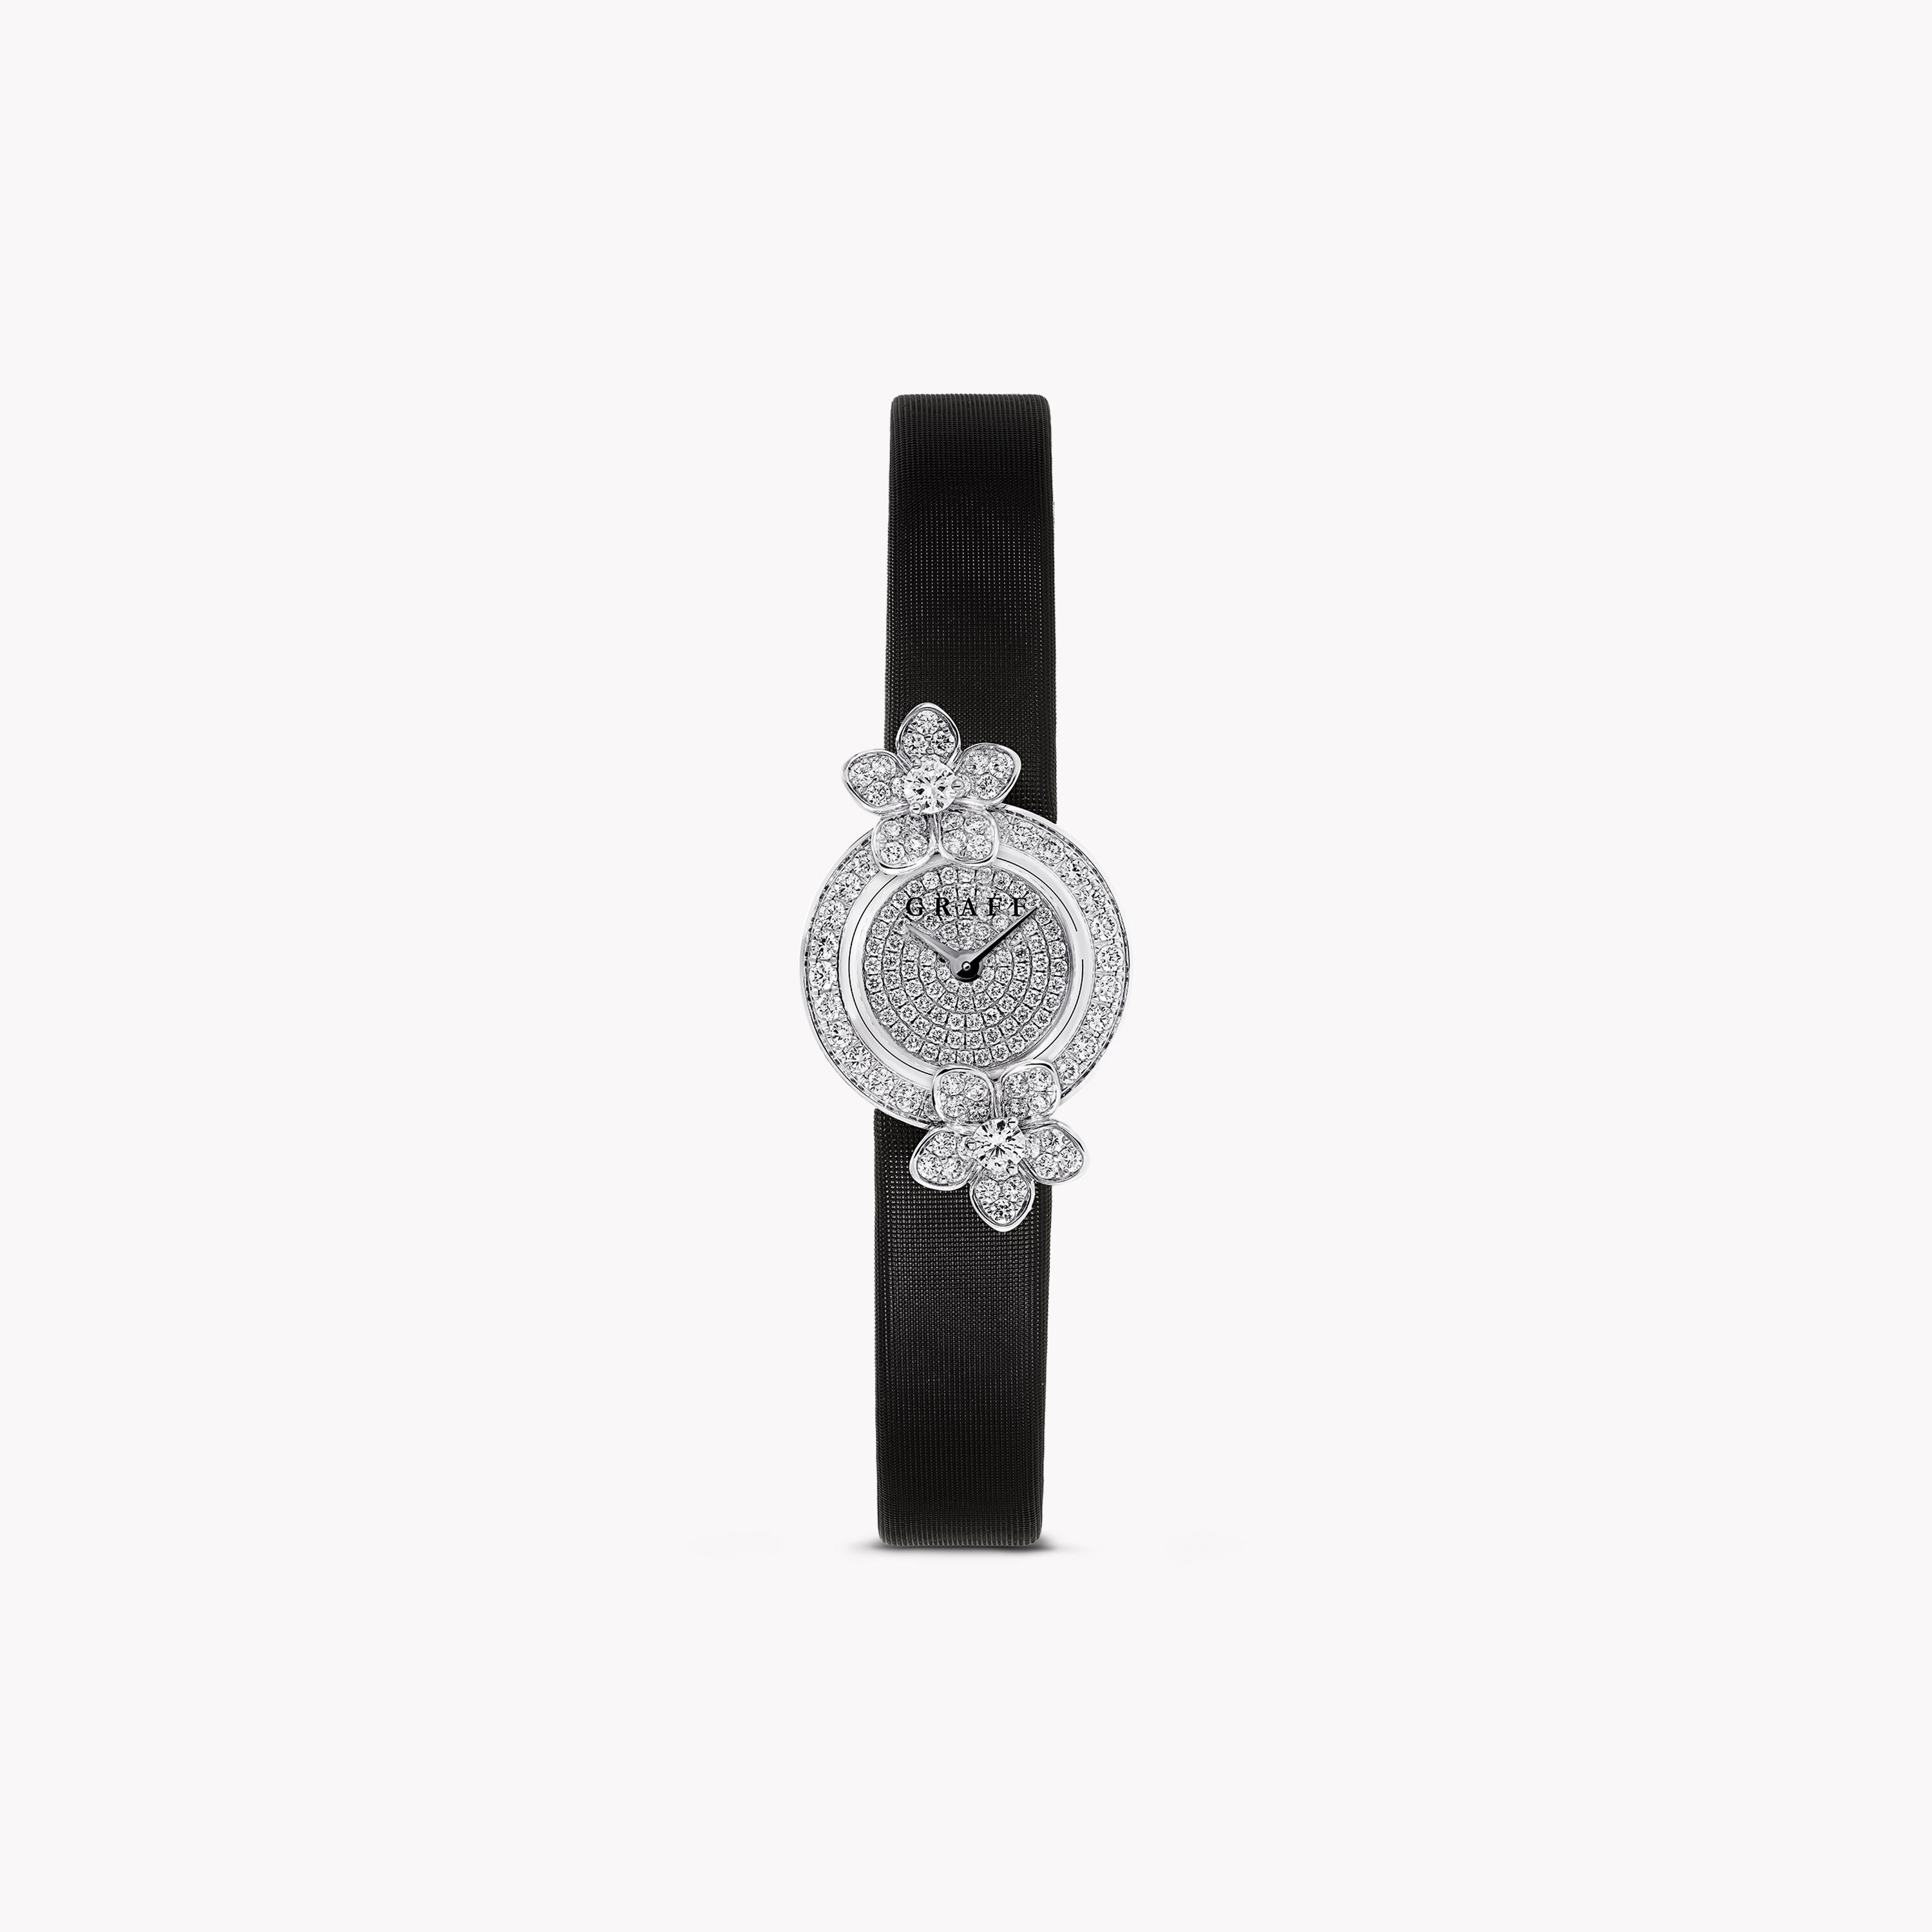 Unique Women's Watches | High Jewellery Timepieces | Graff